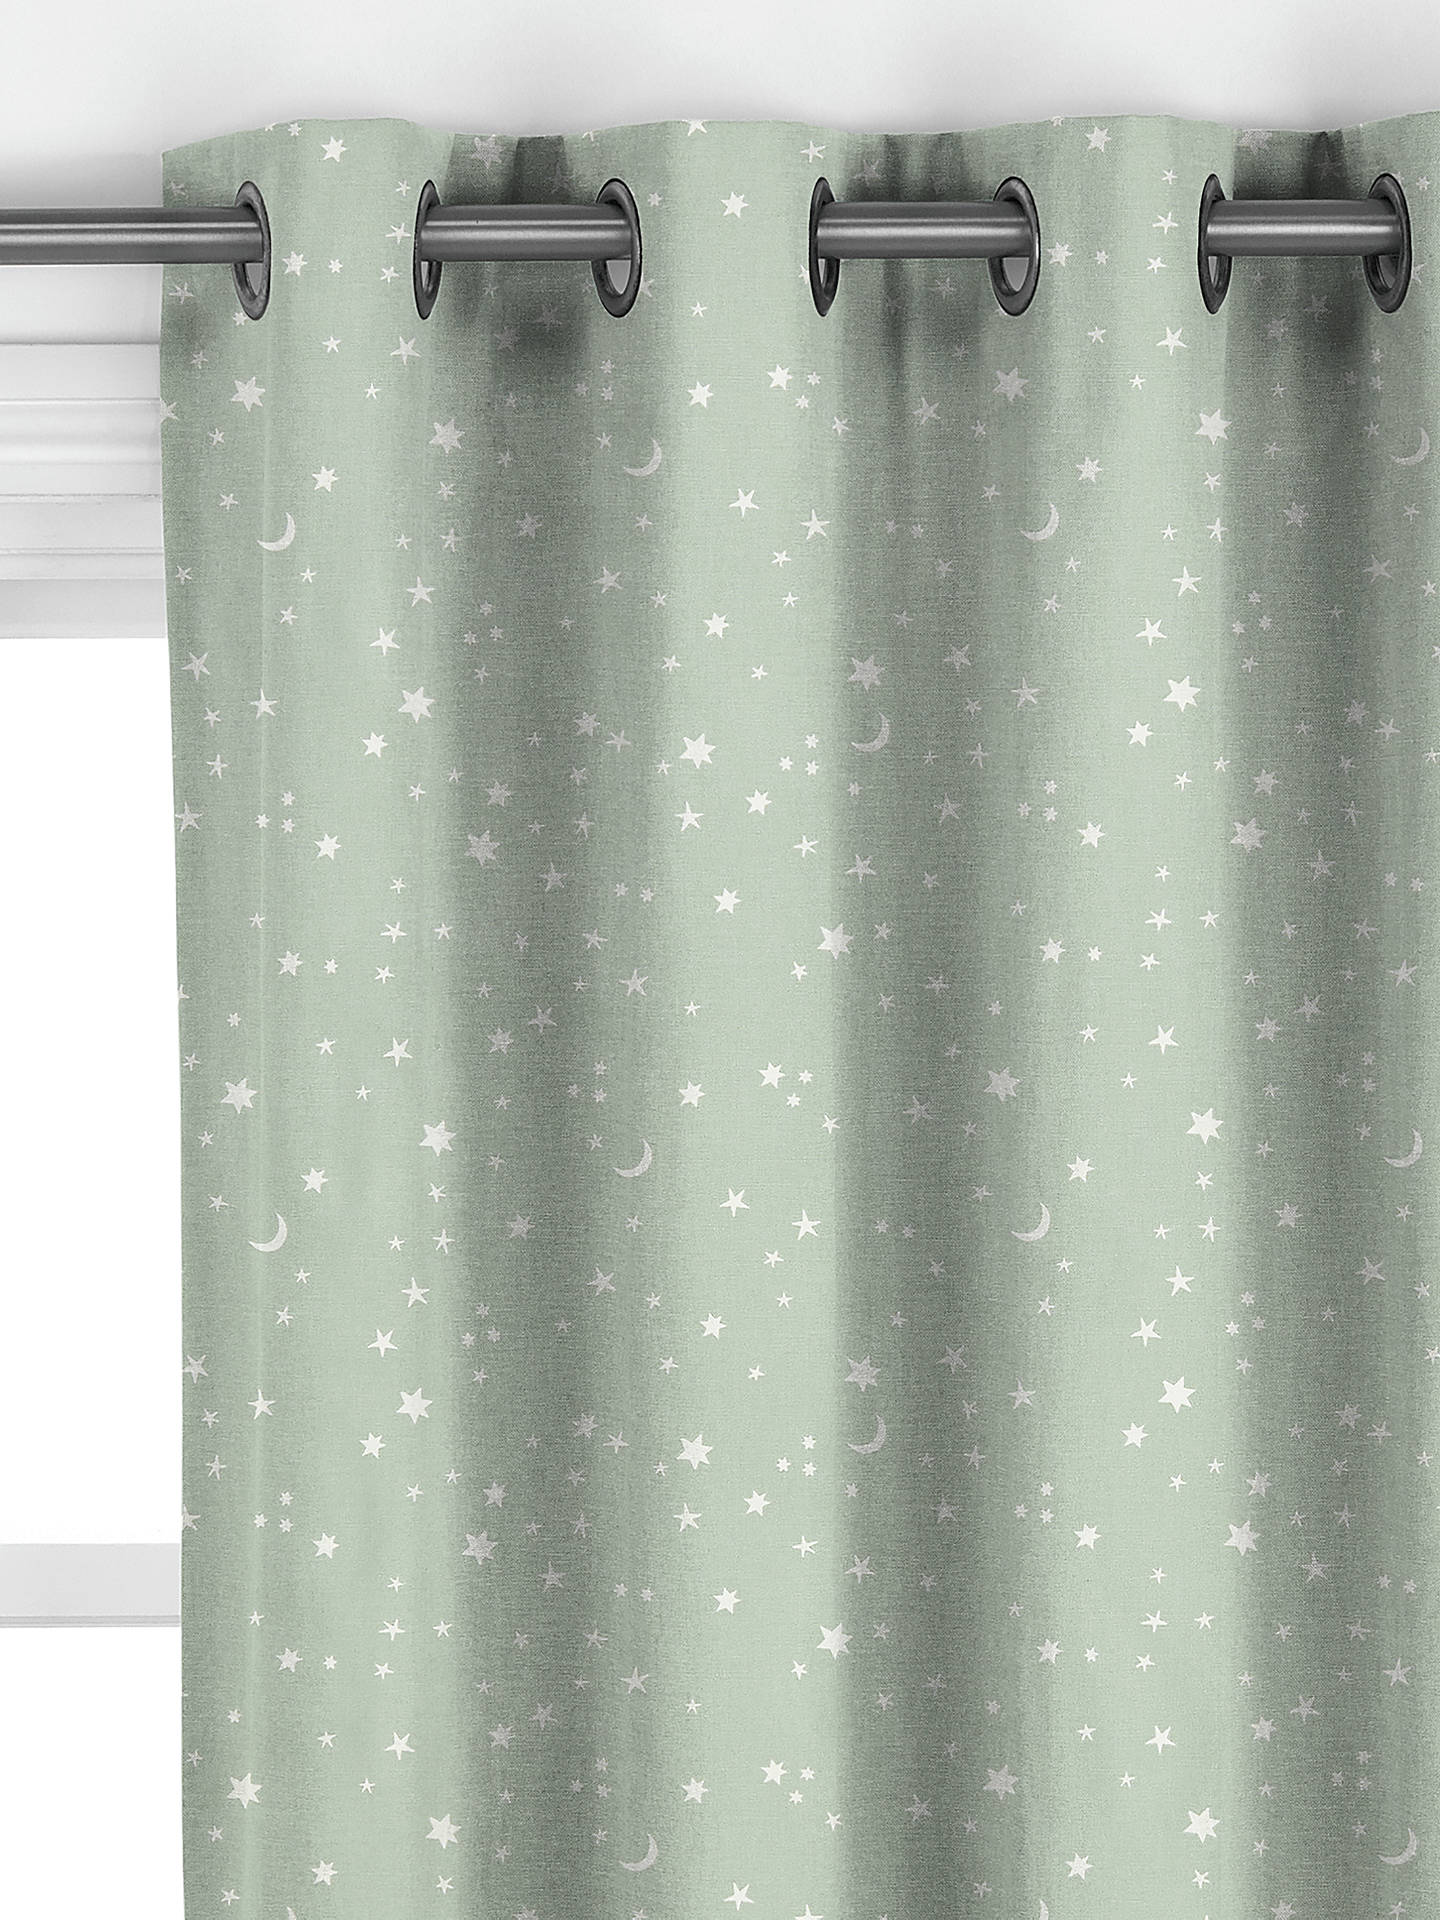 John Lewis Starry Sky Made to Measure Curtains, Mist